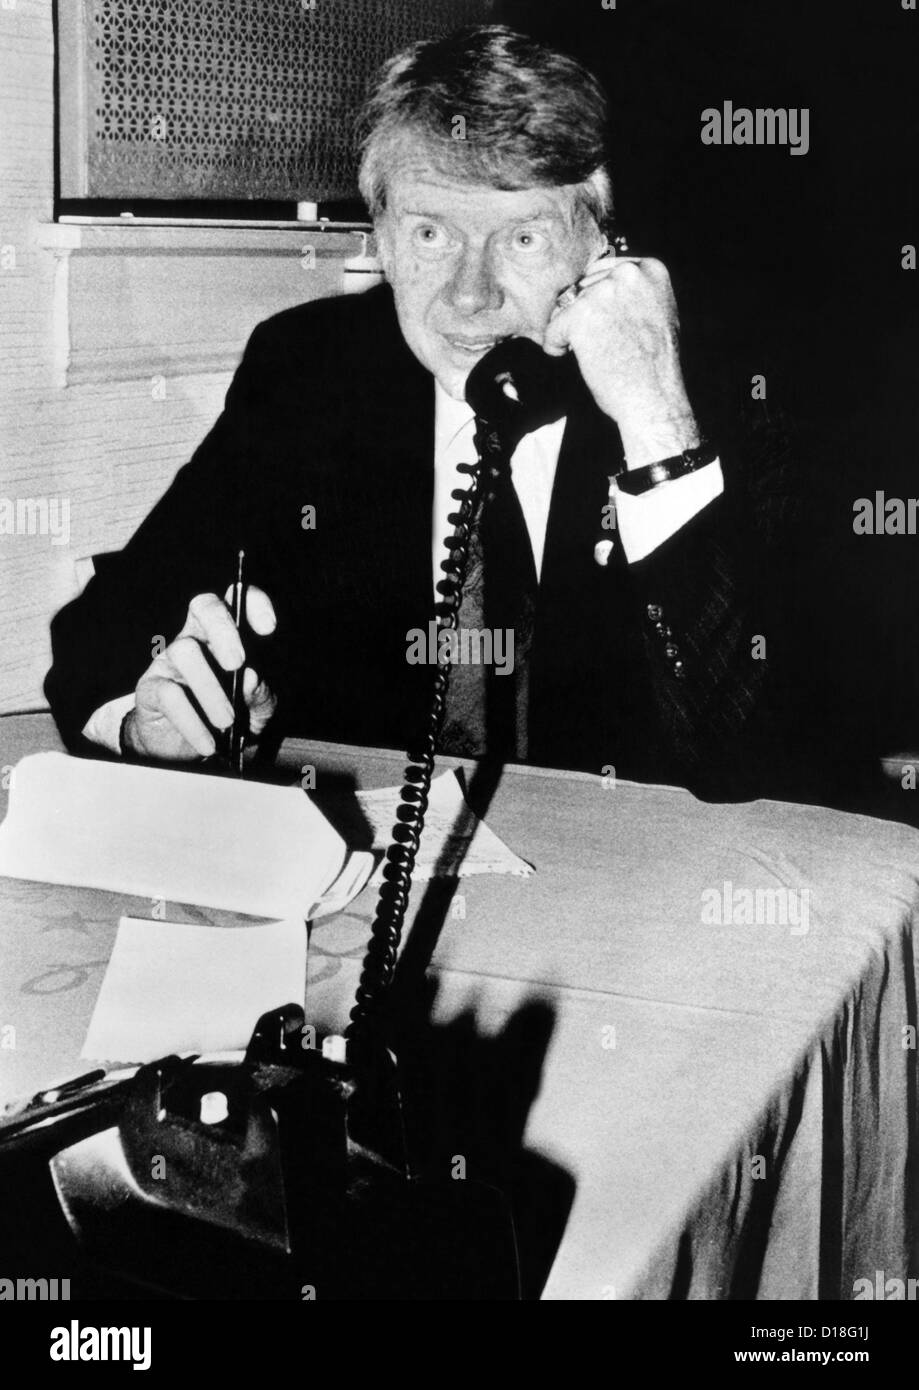 Georgia Governor Jimmy Carter, talking on the telephone during his Democratic Primary campaign. April 12, 1976. (CSU ALPHA 432) Stock Photo